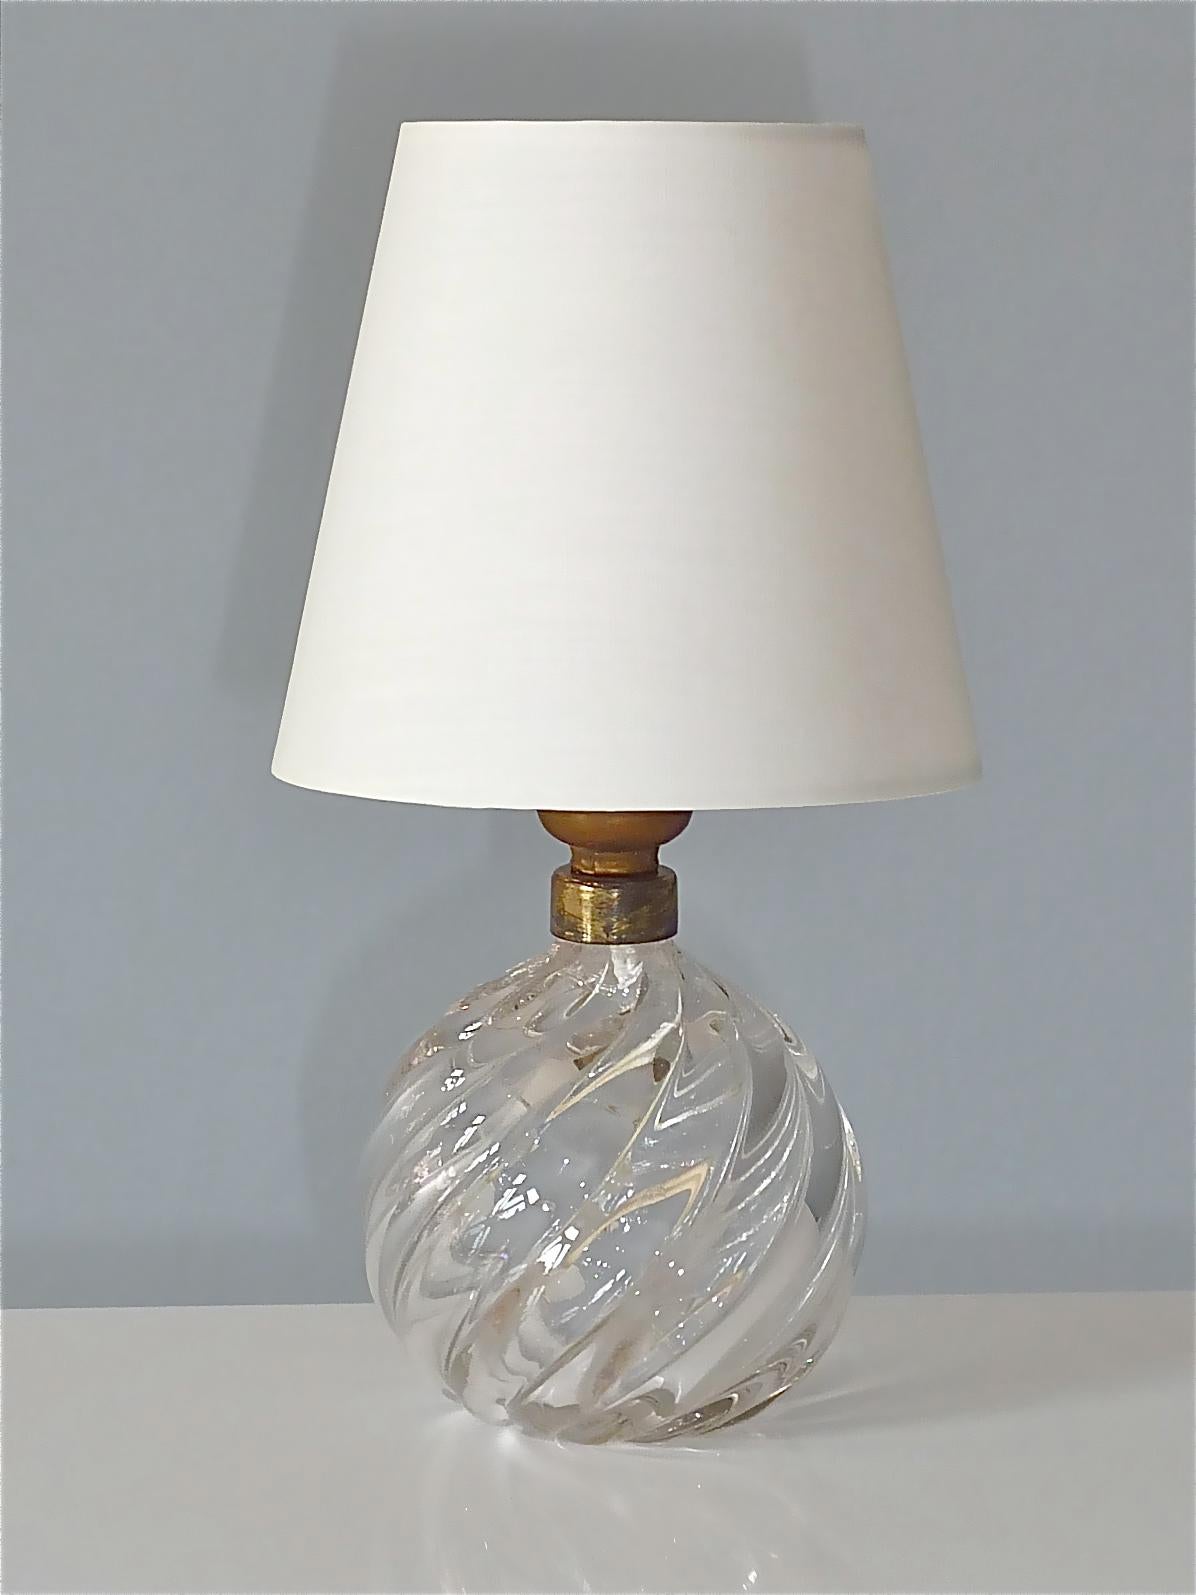 Hand-Crafted Signed Paolo Venini Diamante Midcentury Italian Table Lamp Clear Murano Glass